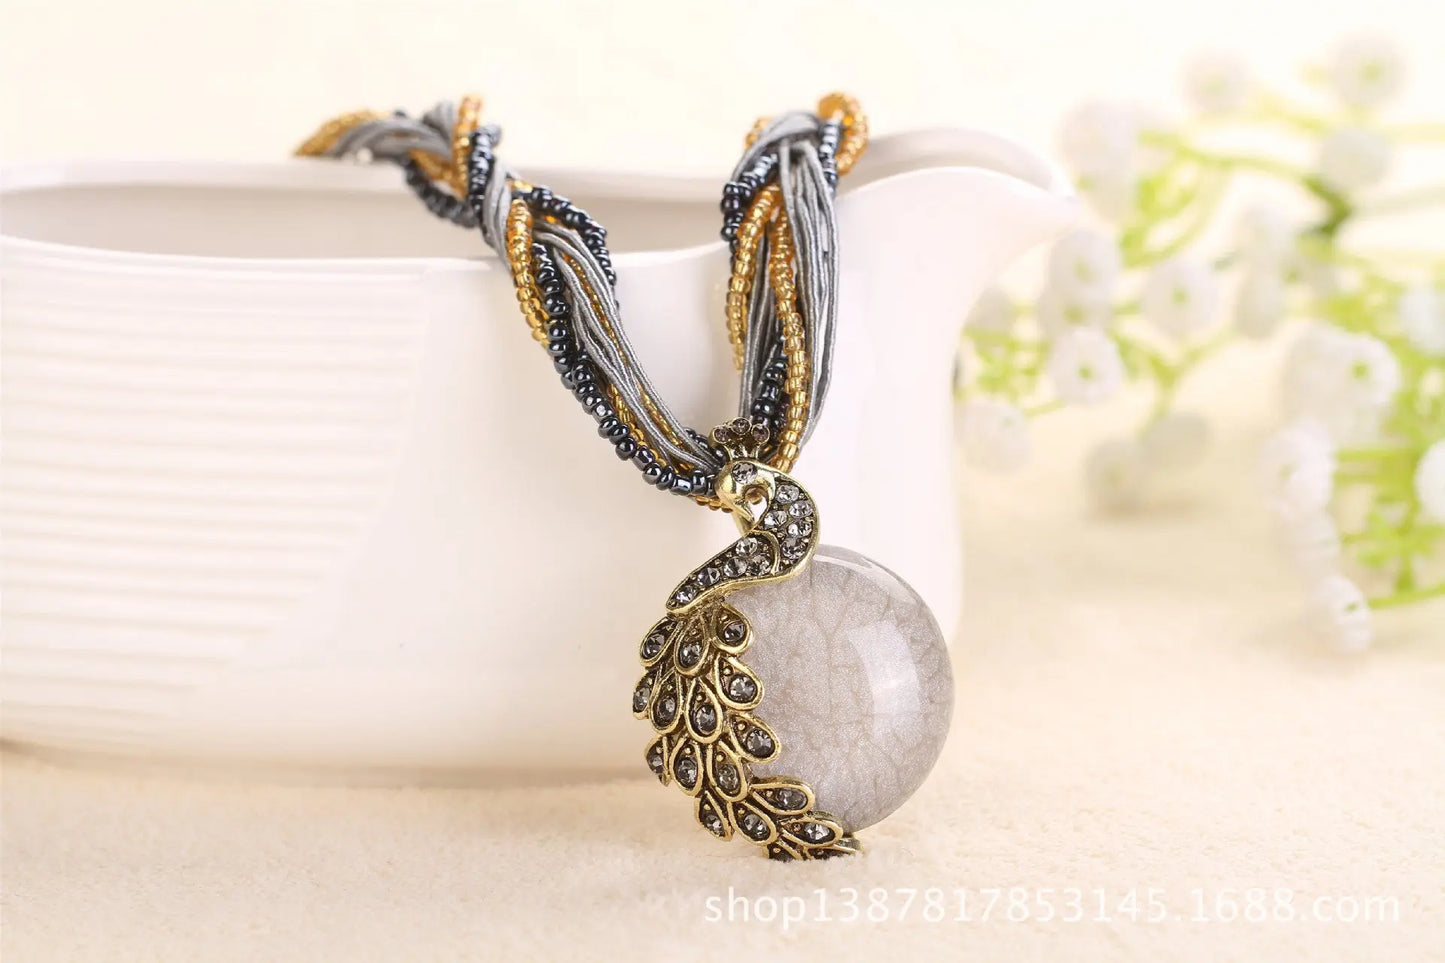 Boho Ethnic Jewelry Choker Handmade Pendant Necklace Natural Stone Bead Peacock Statement Maxi Necklace for Women Girls Gifts - Trending's Arena Beauty Boho Ethnic Jewelry Choker Handmade Pendant Necklace Natural Stone Bead Peacock Statement Maxi Necklace for Women Girls Gifts Electronics Facial & Neck white